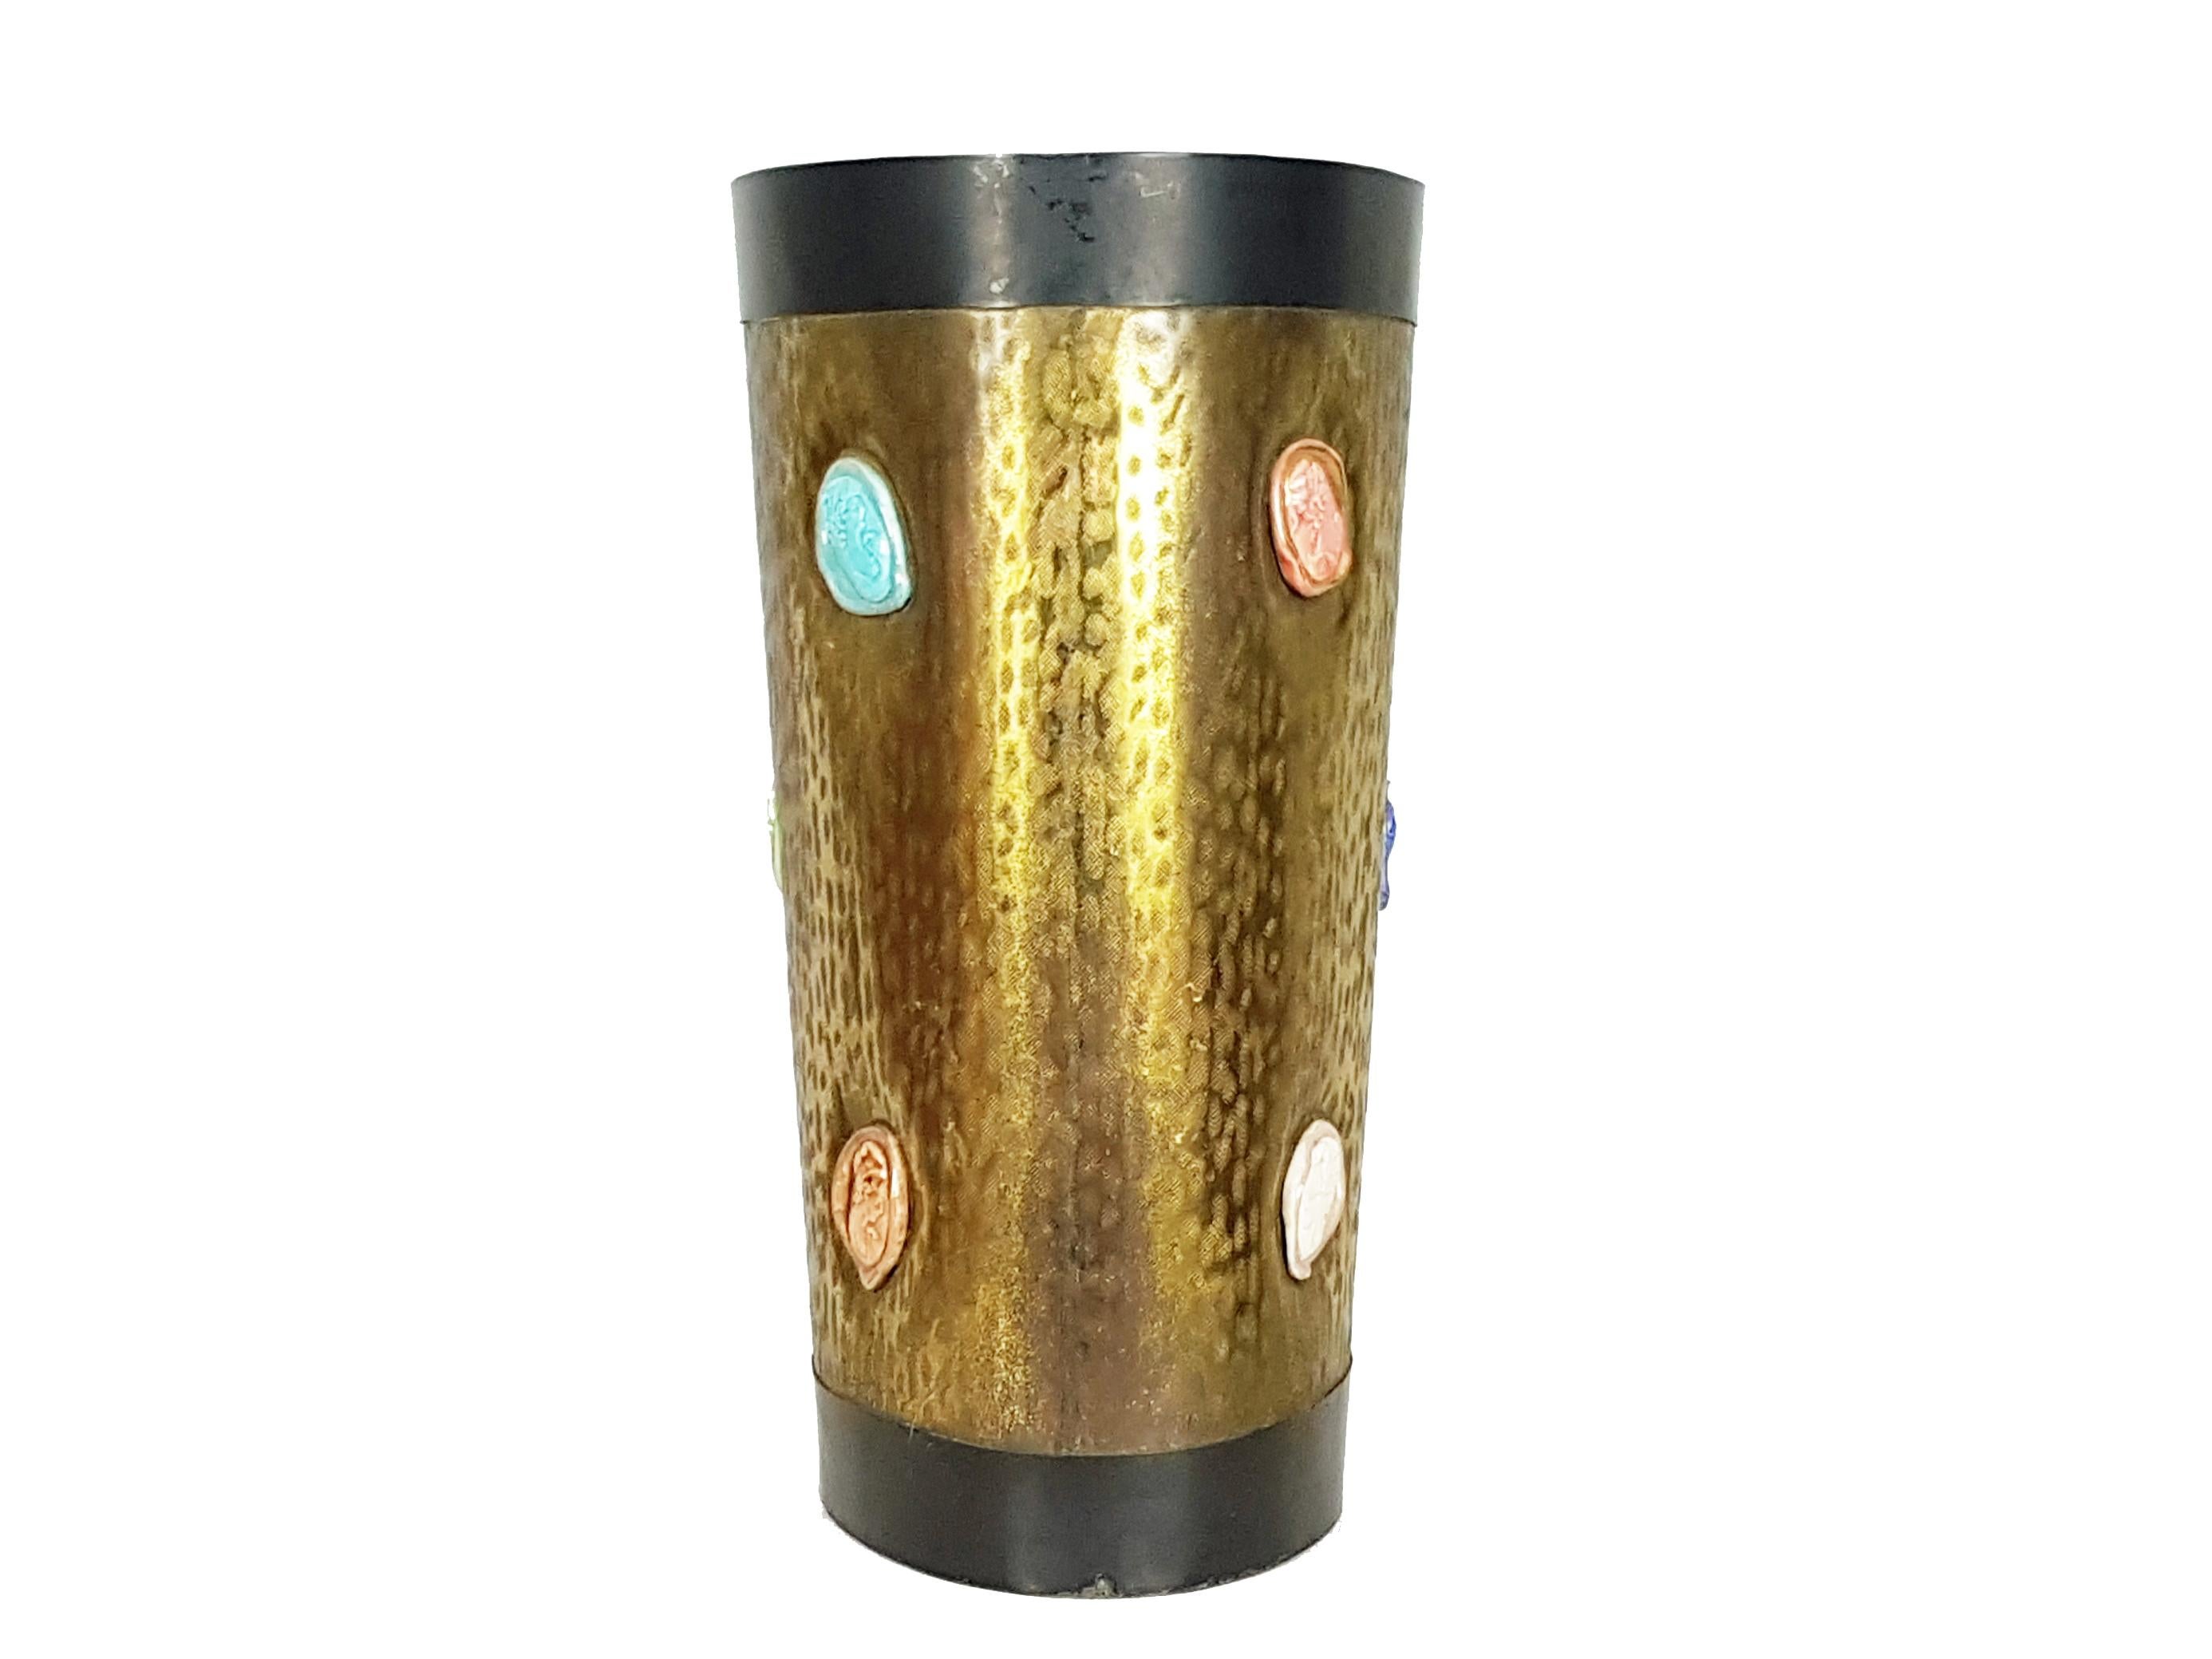 This elegant umbrella stand was manufactured in Italy in the 1950s.
It is made from an engraved brass sheet with two black painted metal stripes and multicolored ceramic 